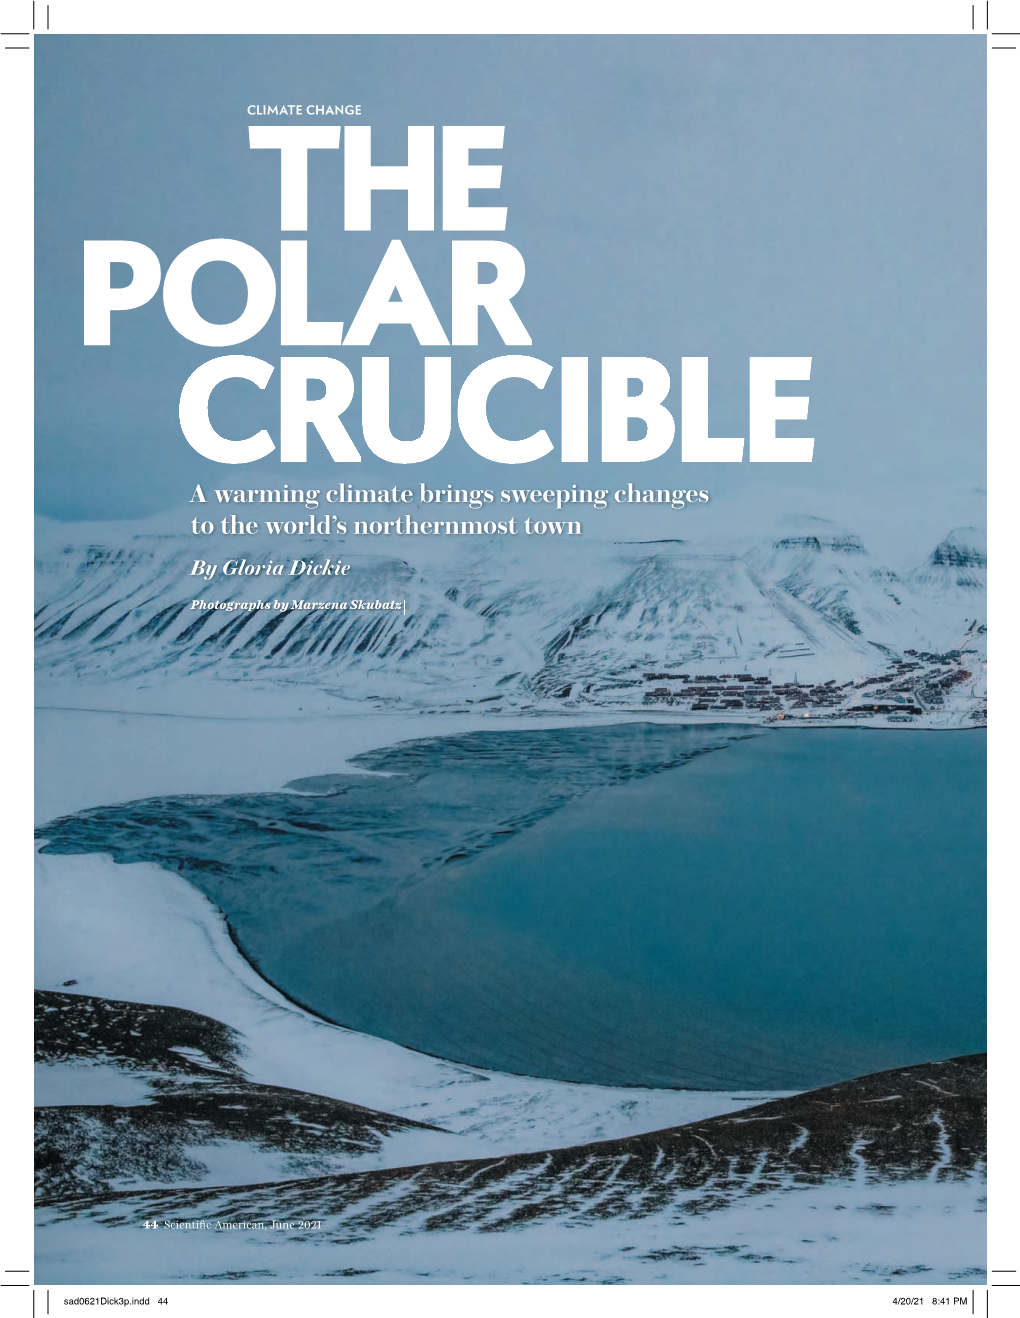 THE POLAR CRUCIBLE a Warming Climate Brings Sweeping Changes to the World’S Northernmost Town by Gloria Dickie